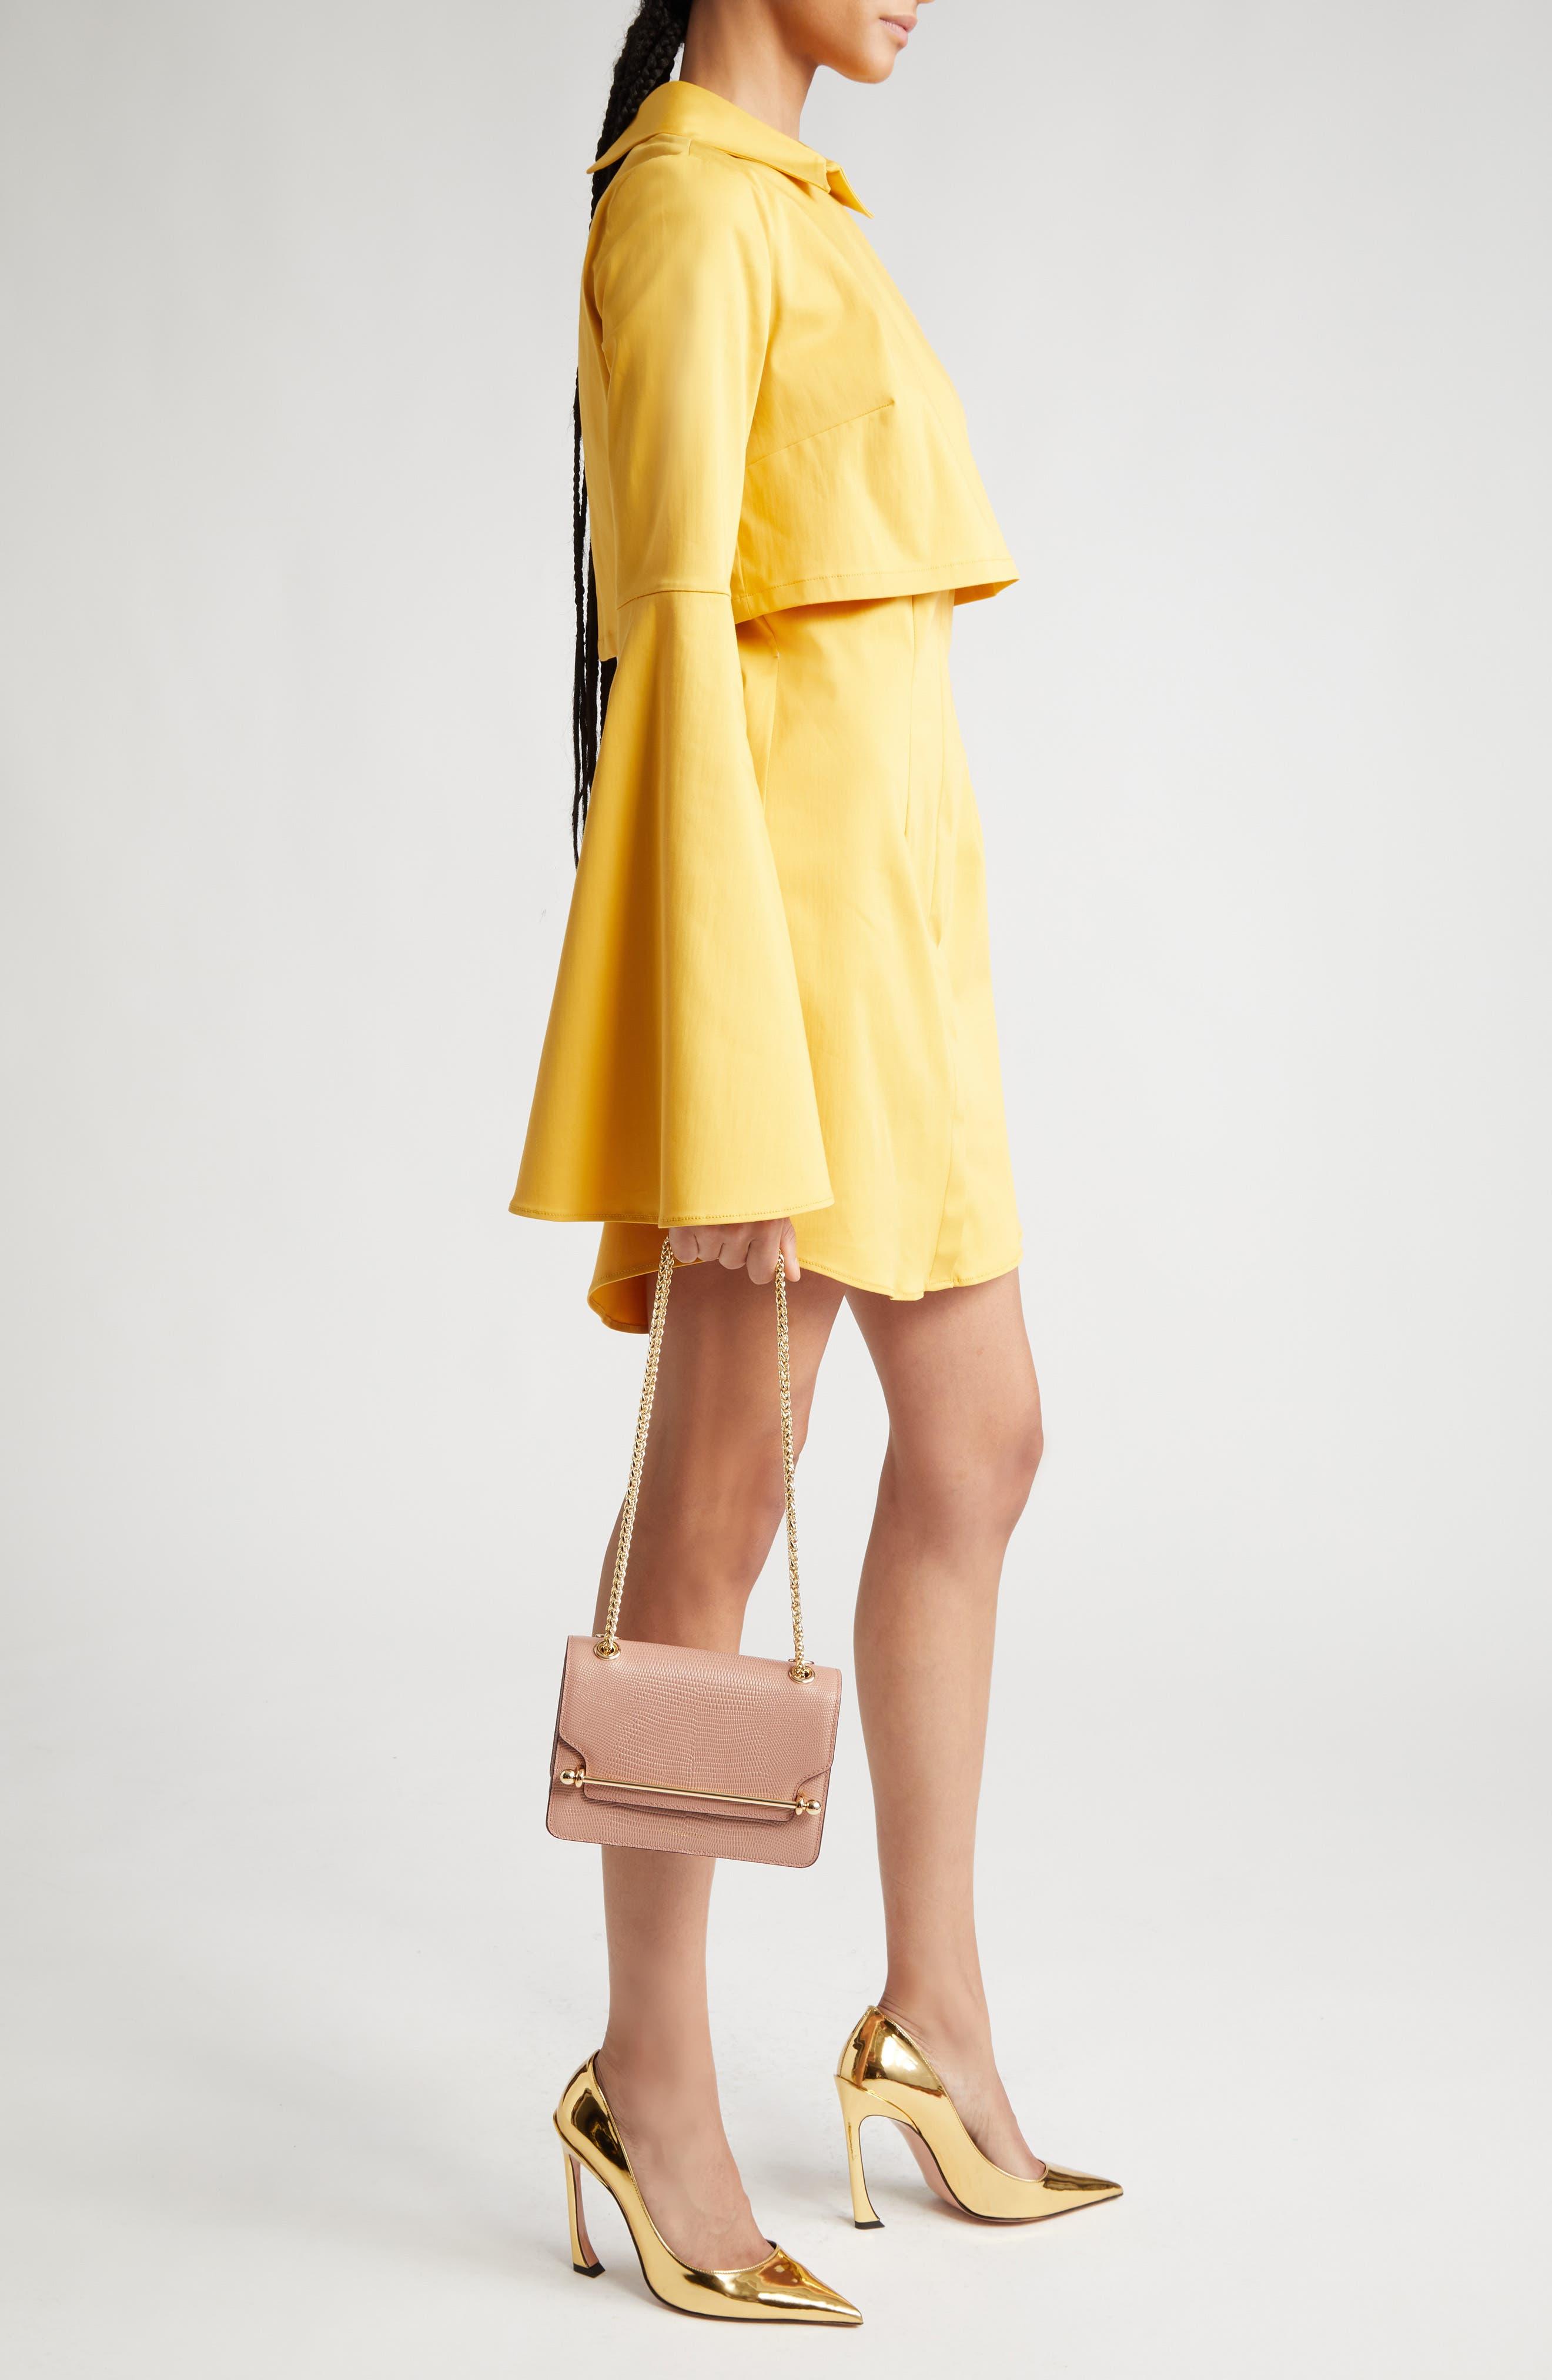 Strathberry Yellow Leather Mini East West Leather Crossbody Bag